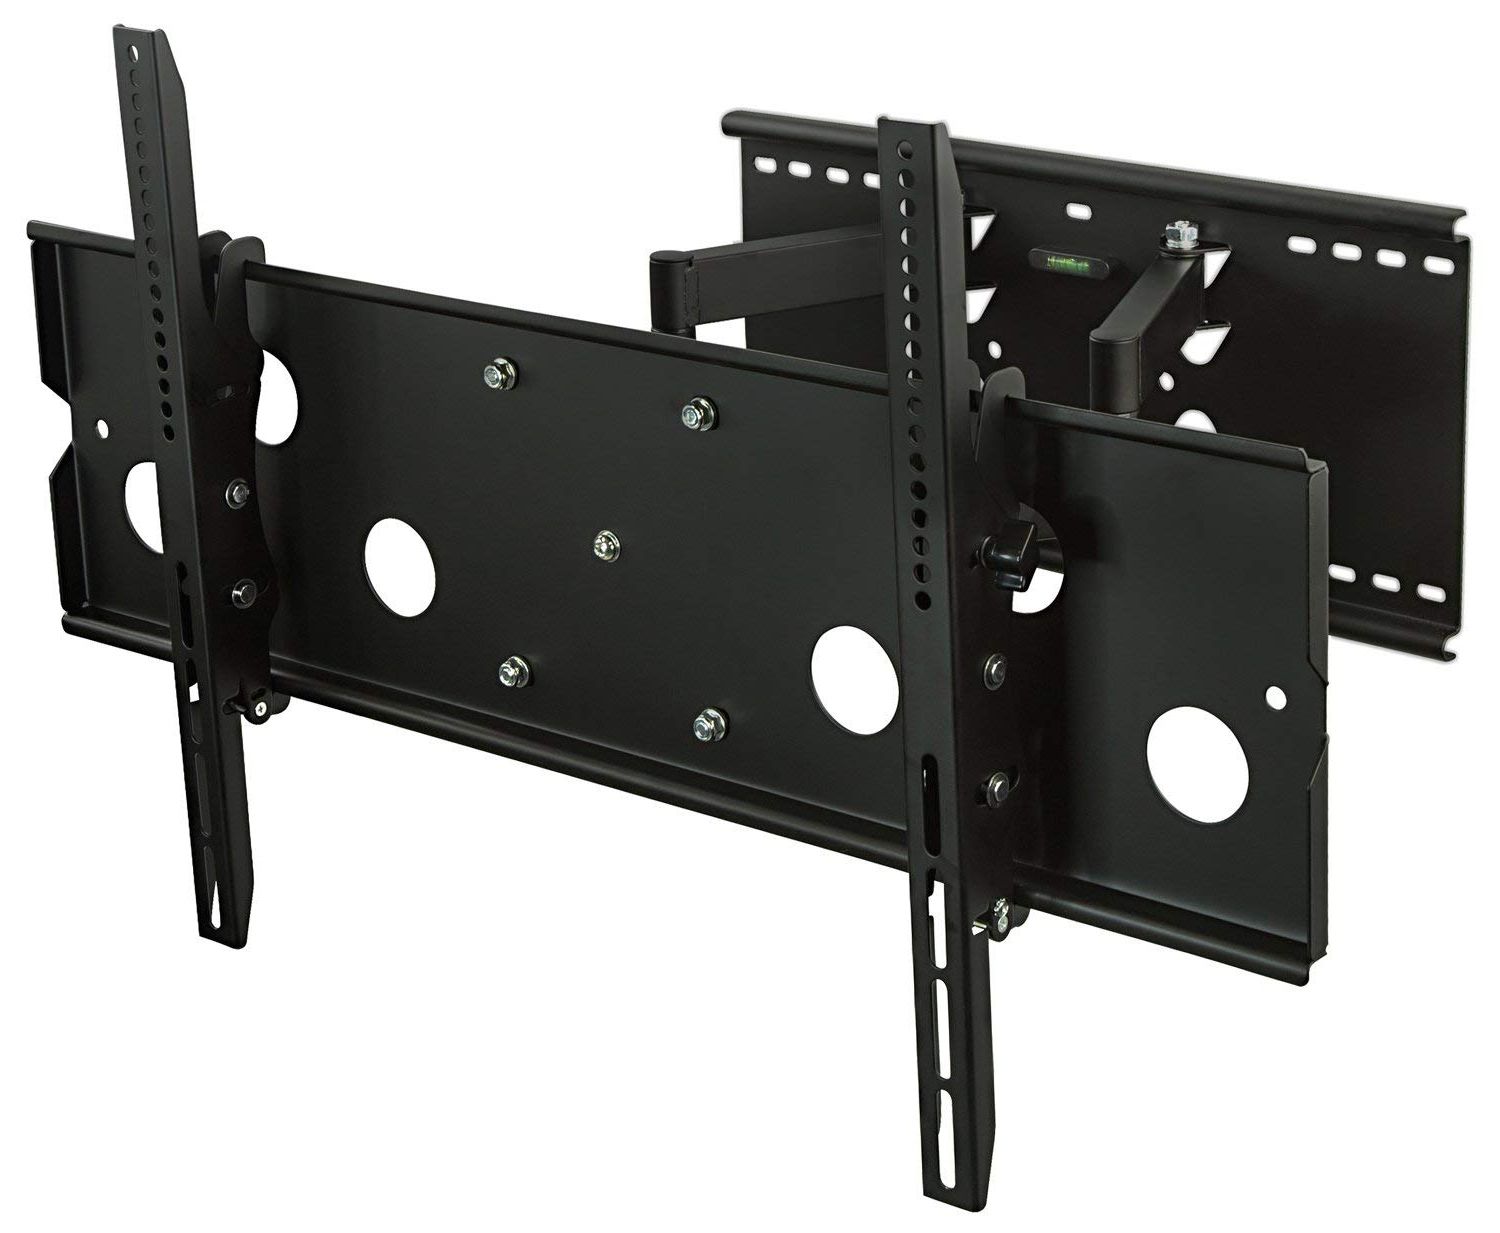 Tilted Wall Mount For Tv Intended For Favorite Amazon: Mount It! Mi 310l Full Motion Tv Wall Mount Bracket (View 10 of 20)